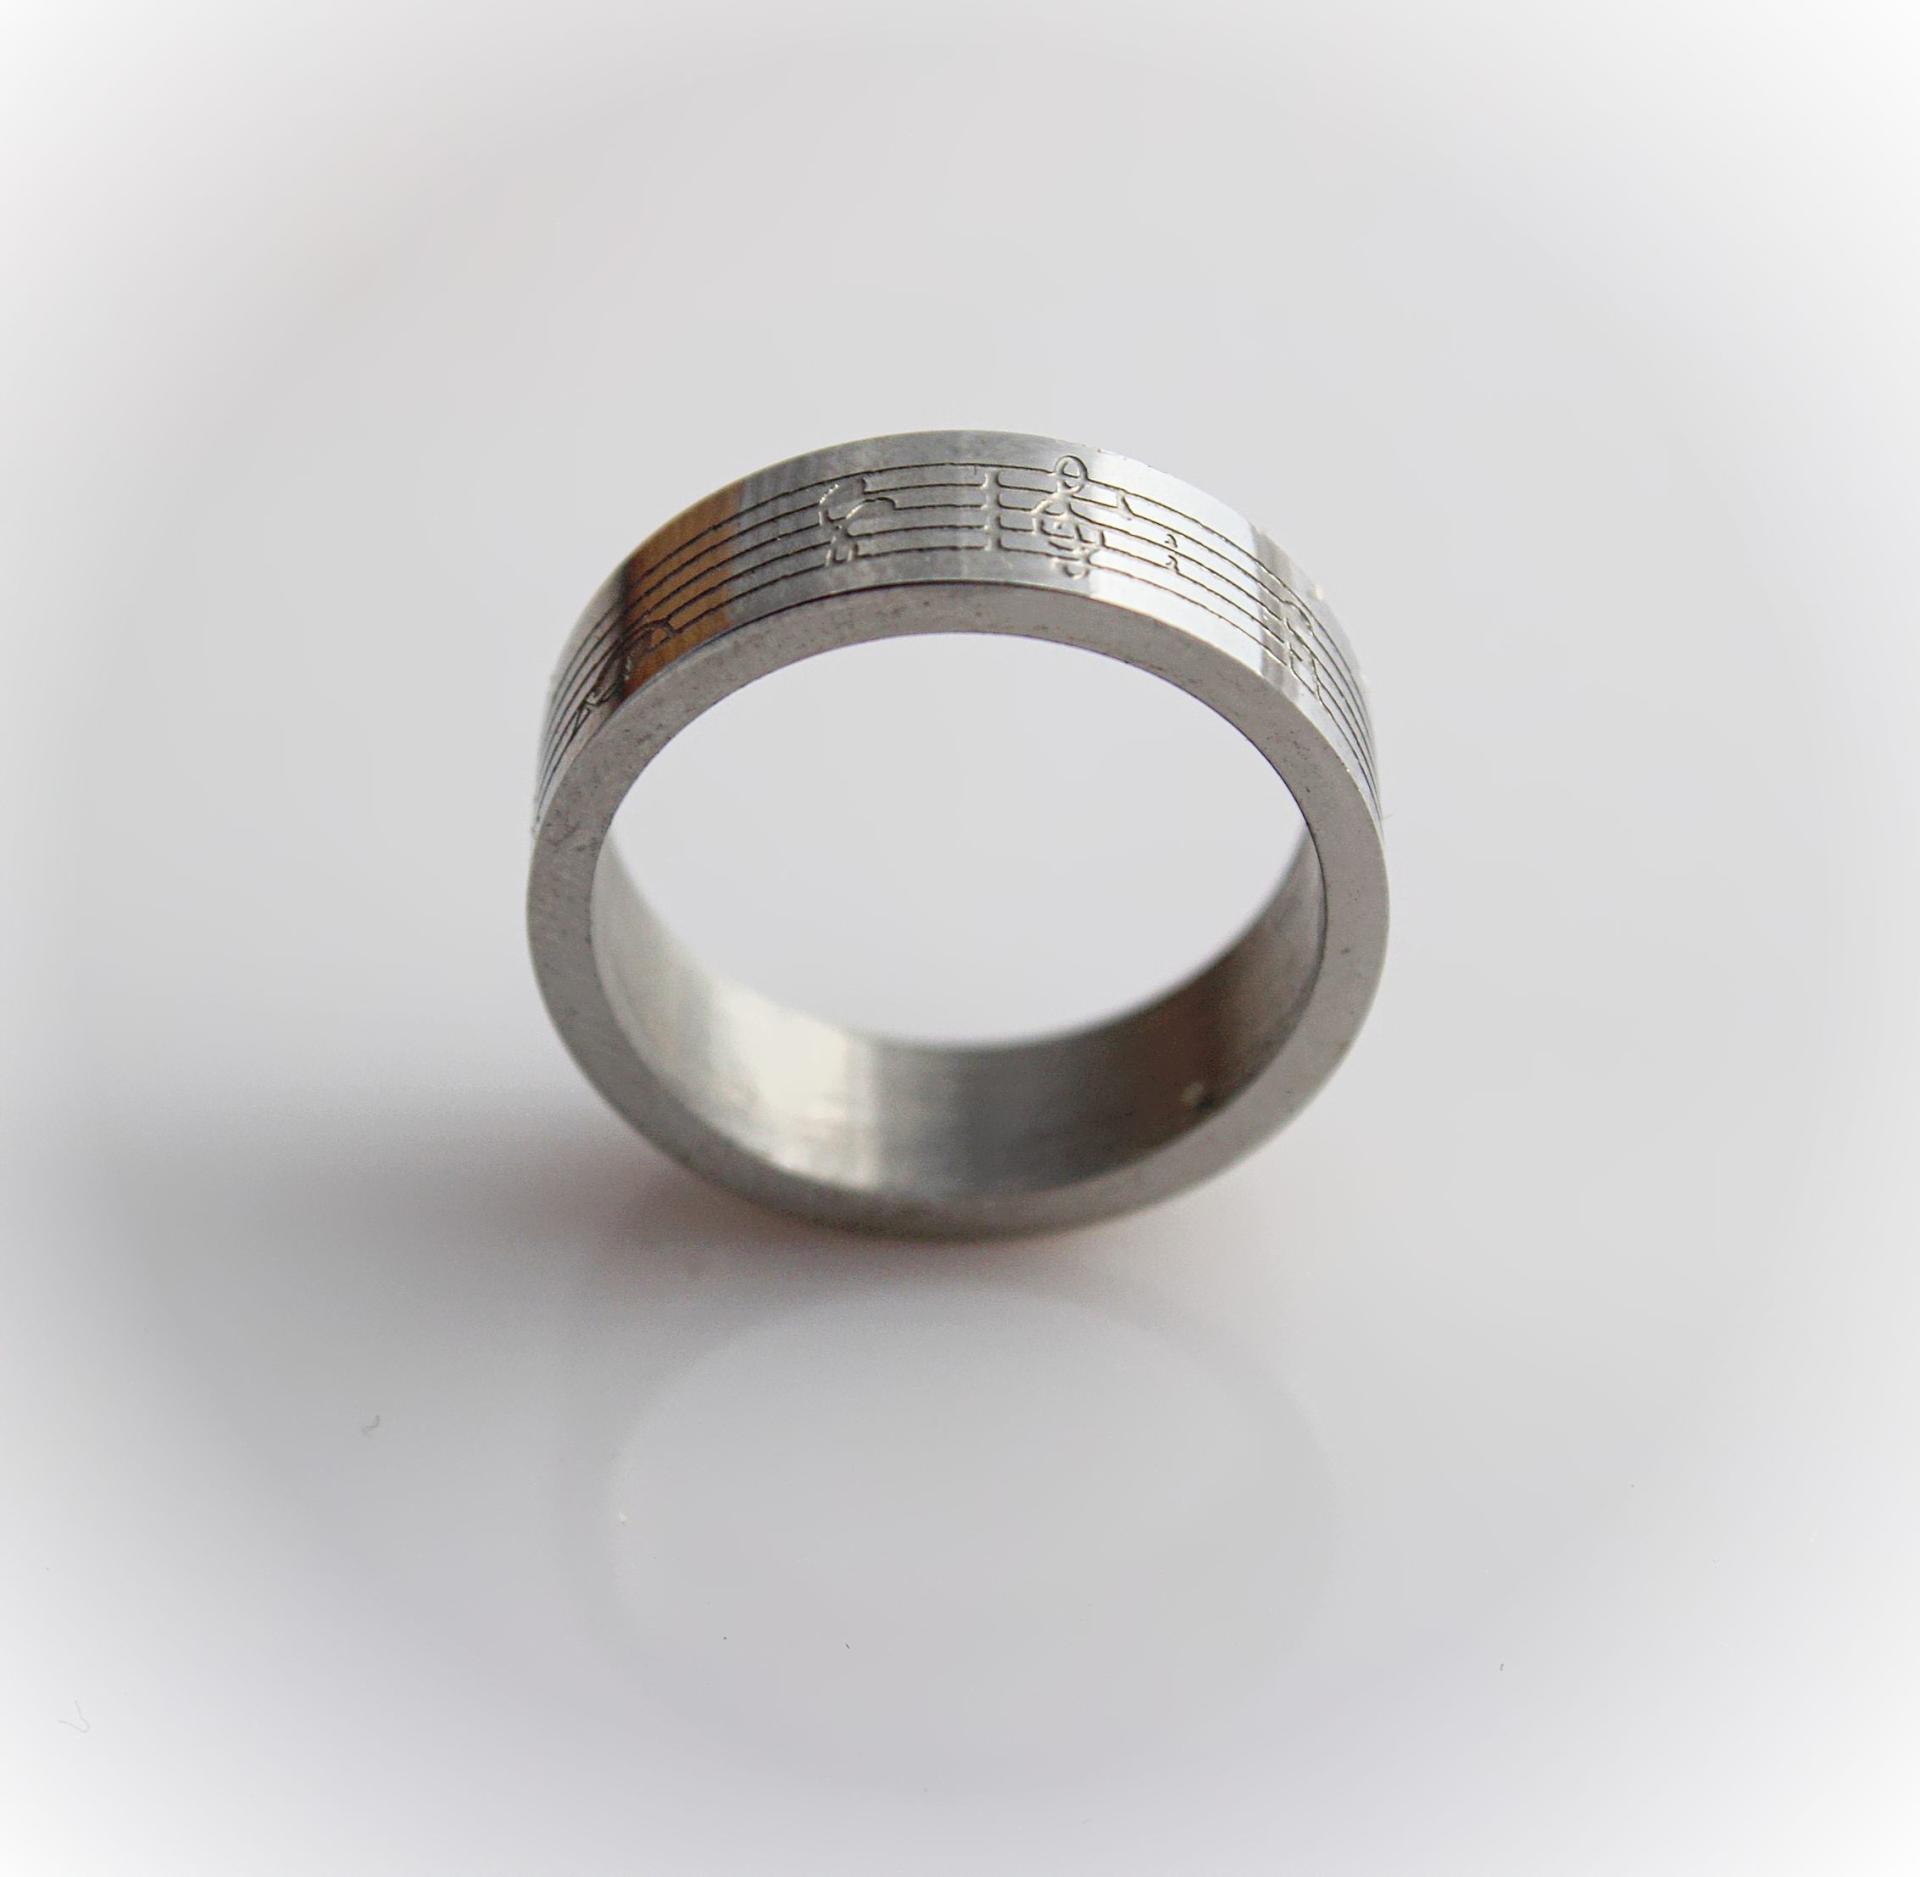 Stainless Steel Music Note Ring